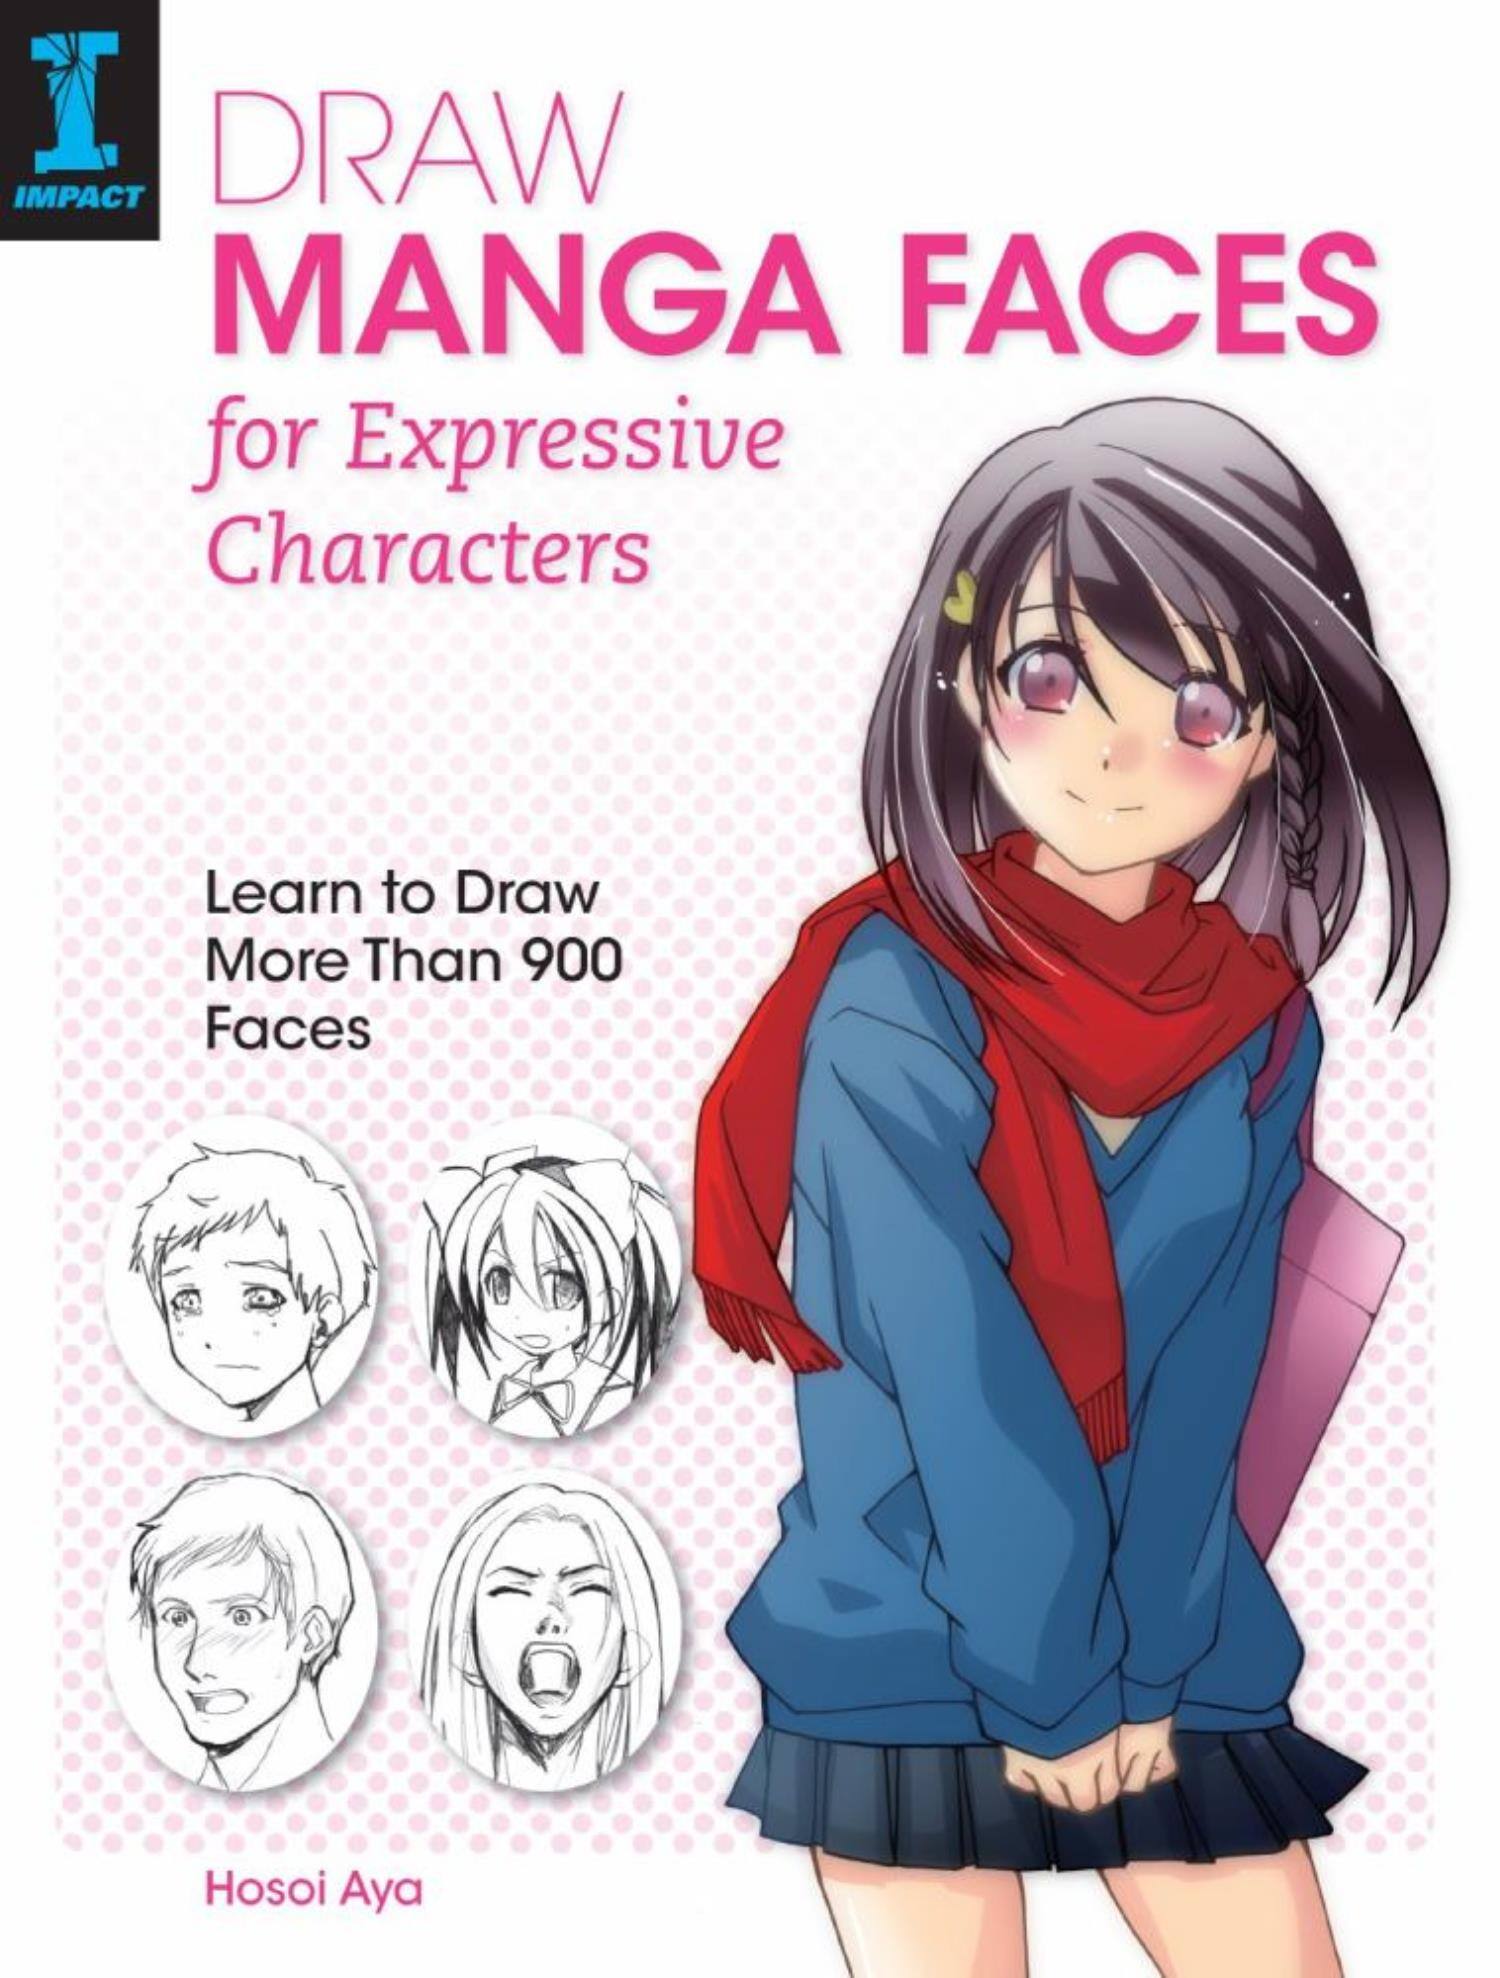 Draw-Manga-Faces-for-Expressive-Characters-Learn-to-Draw-More-Than-900-Faces